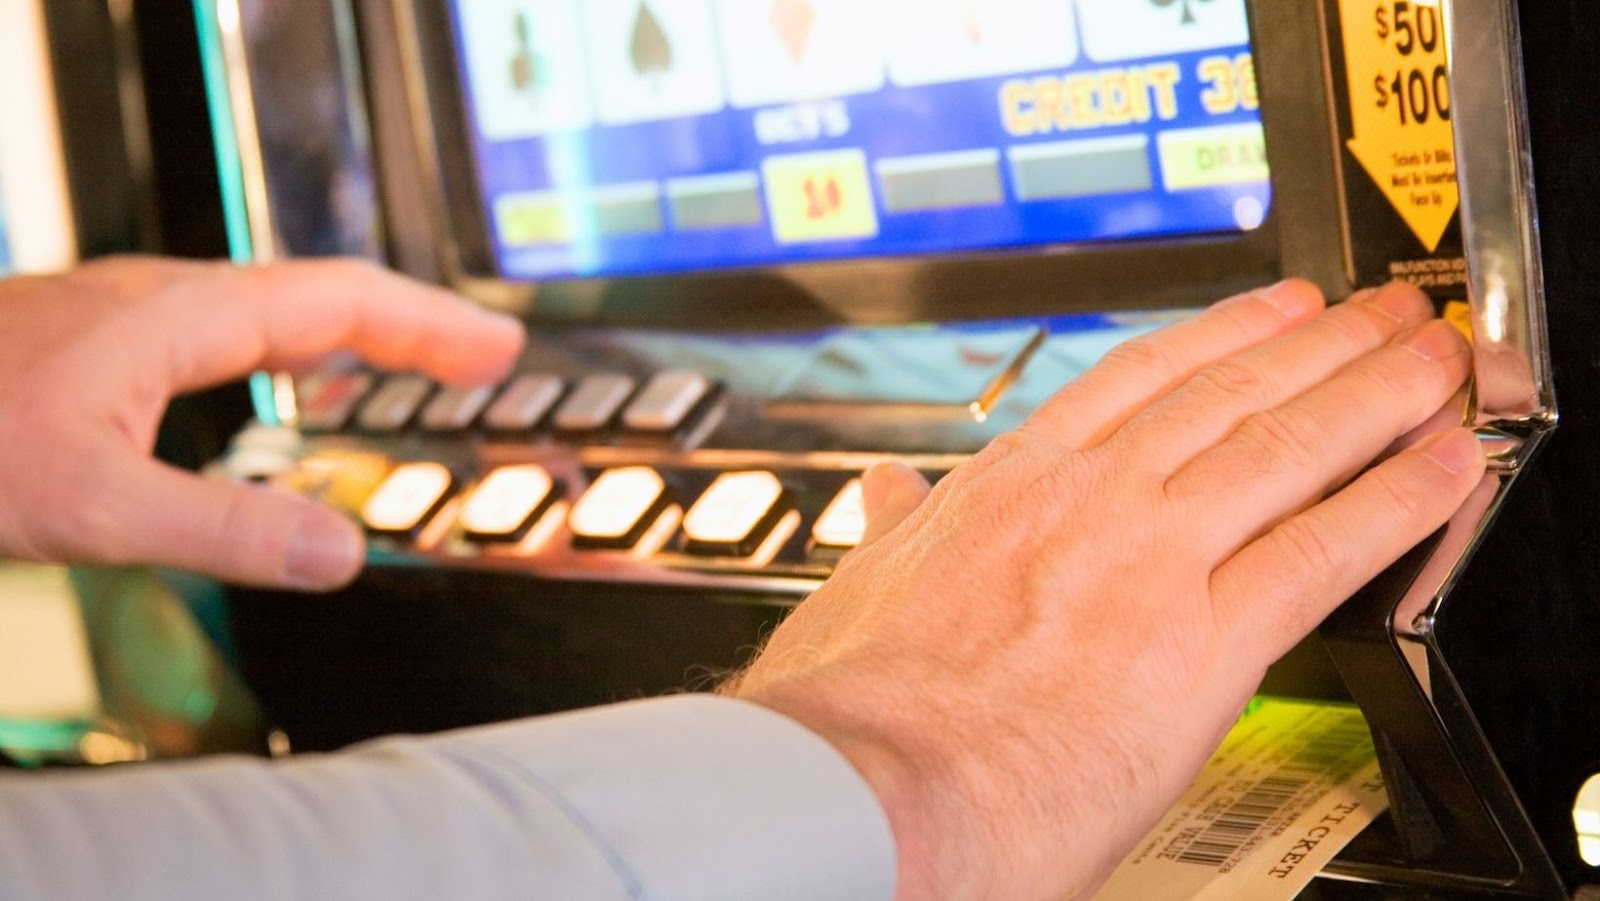 The Similarities Between Video Games And Casino Games